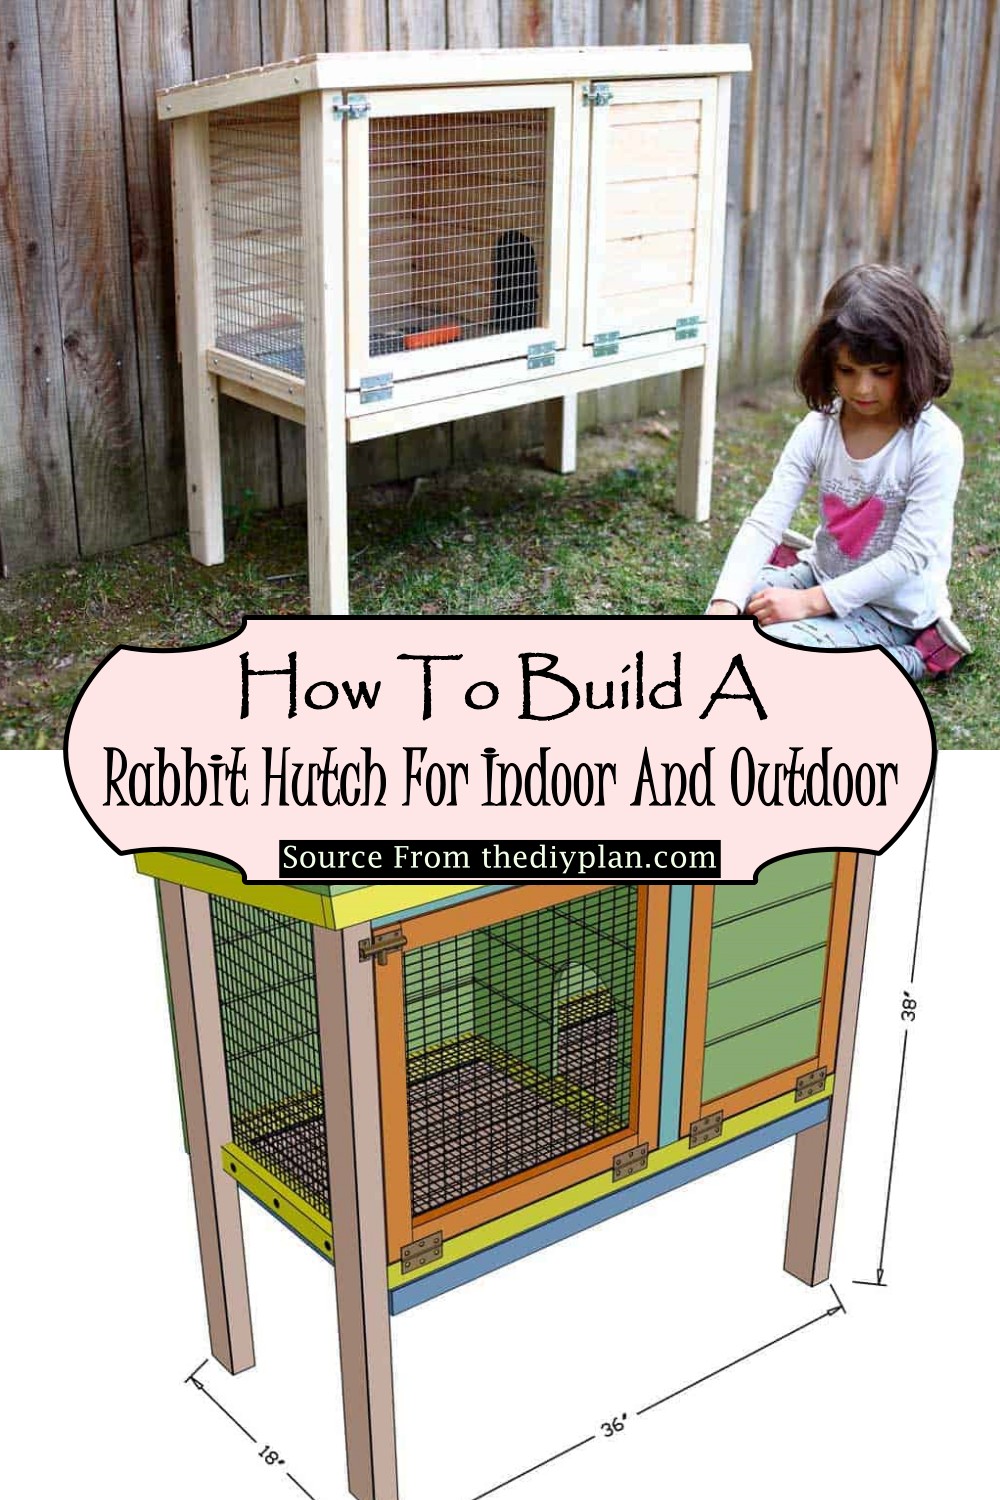 How to Build a Rabbit Hutch for Indoor and Outdoor